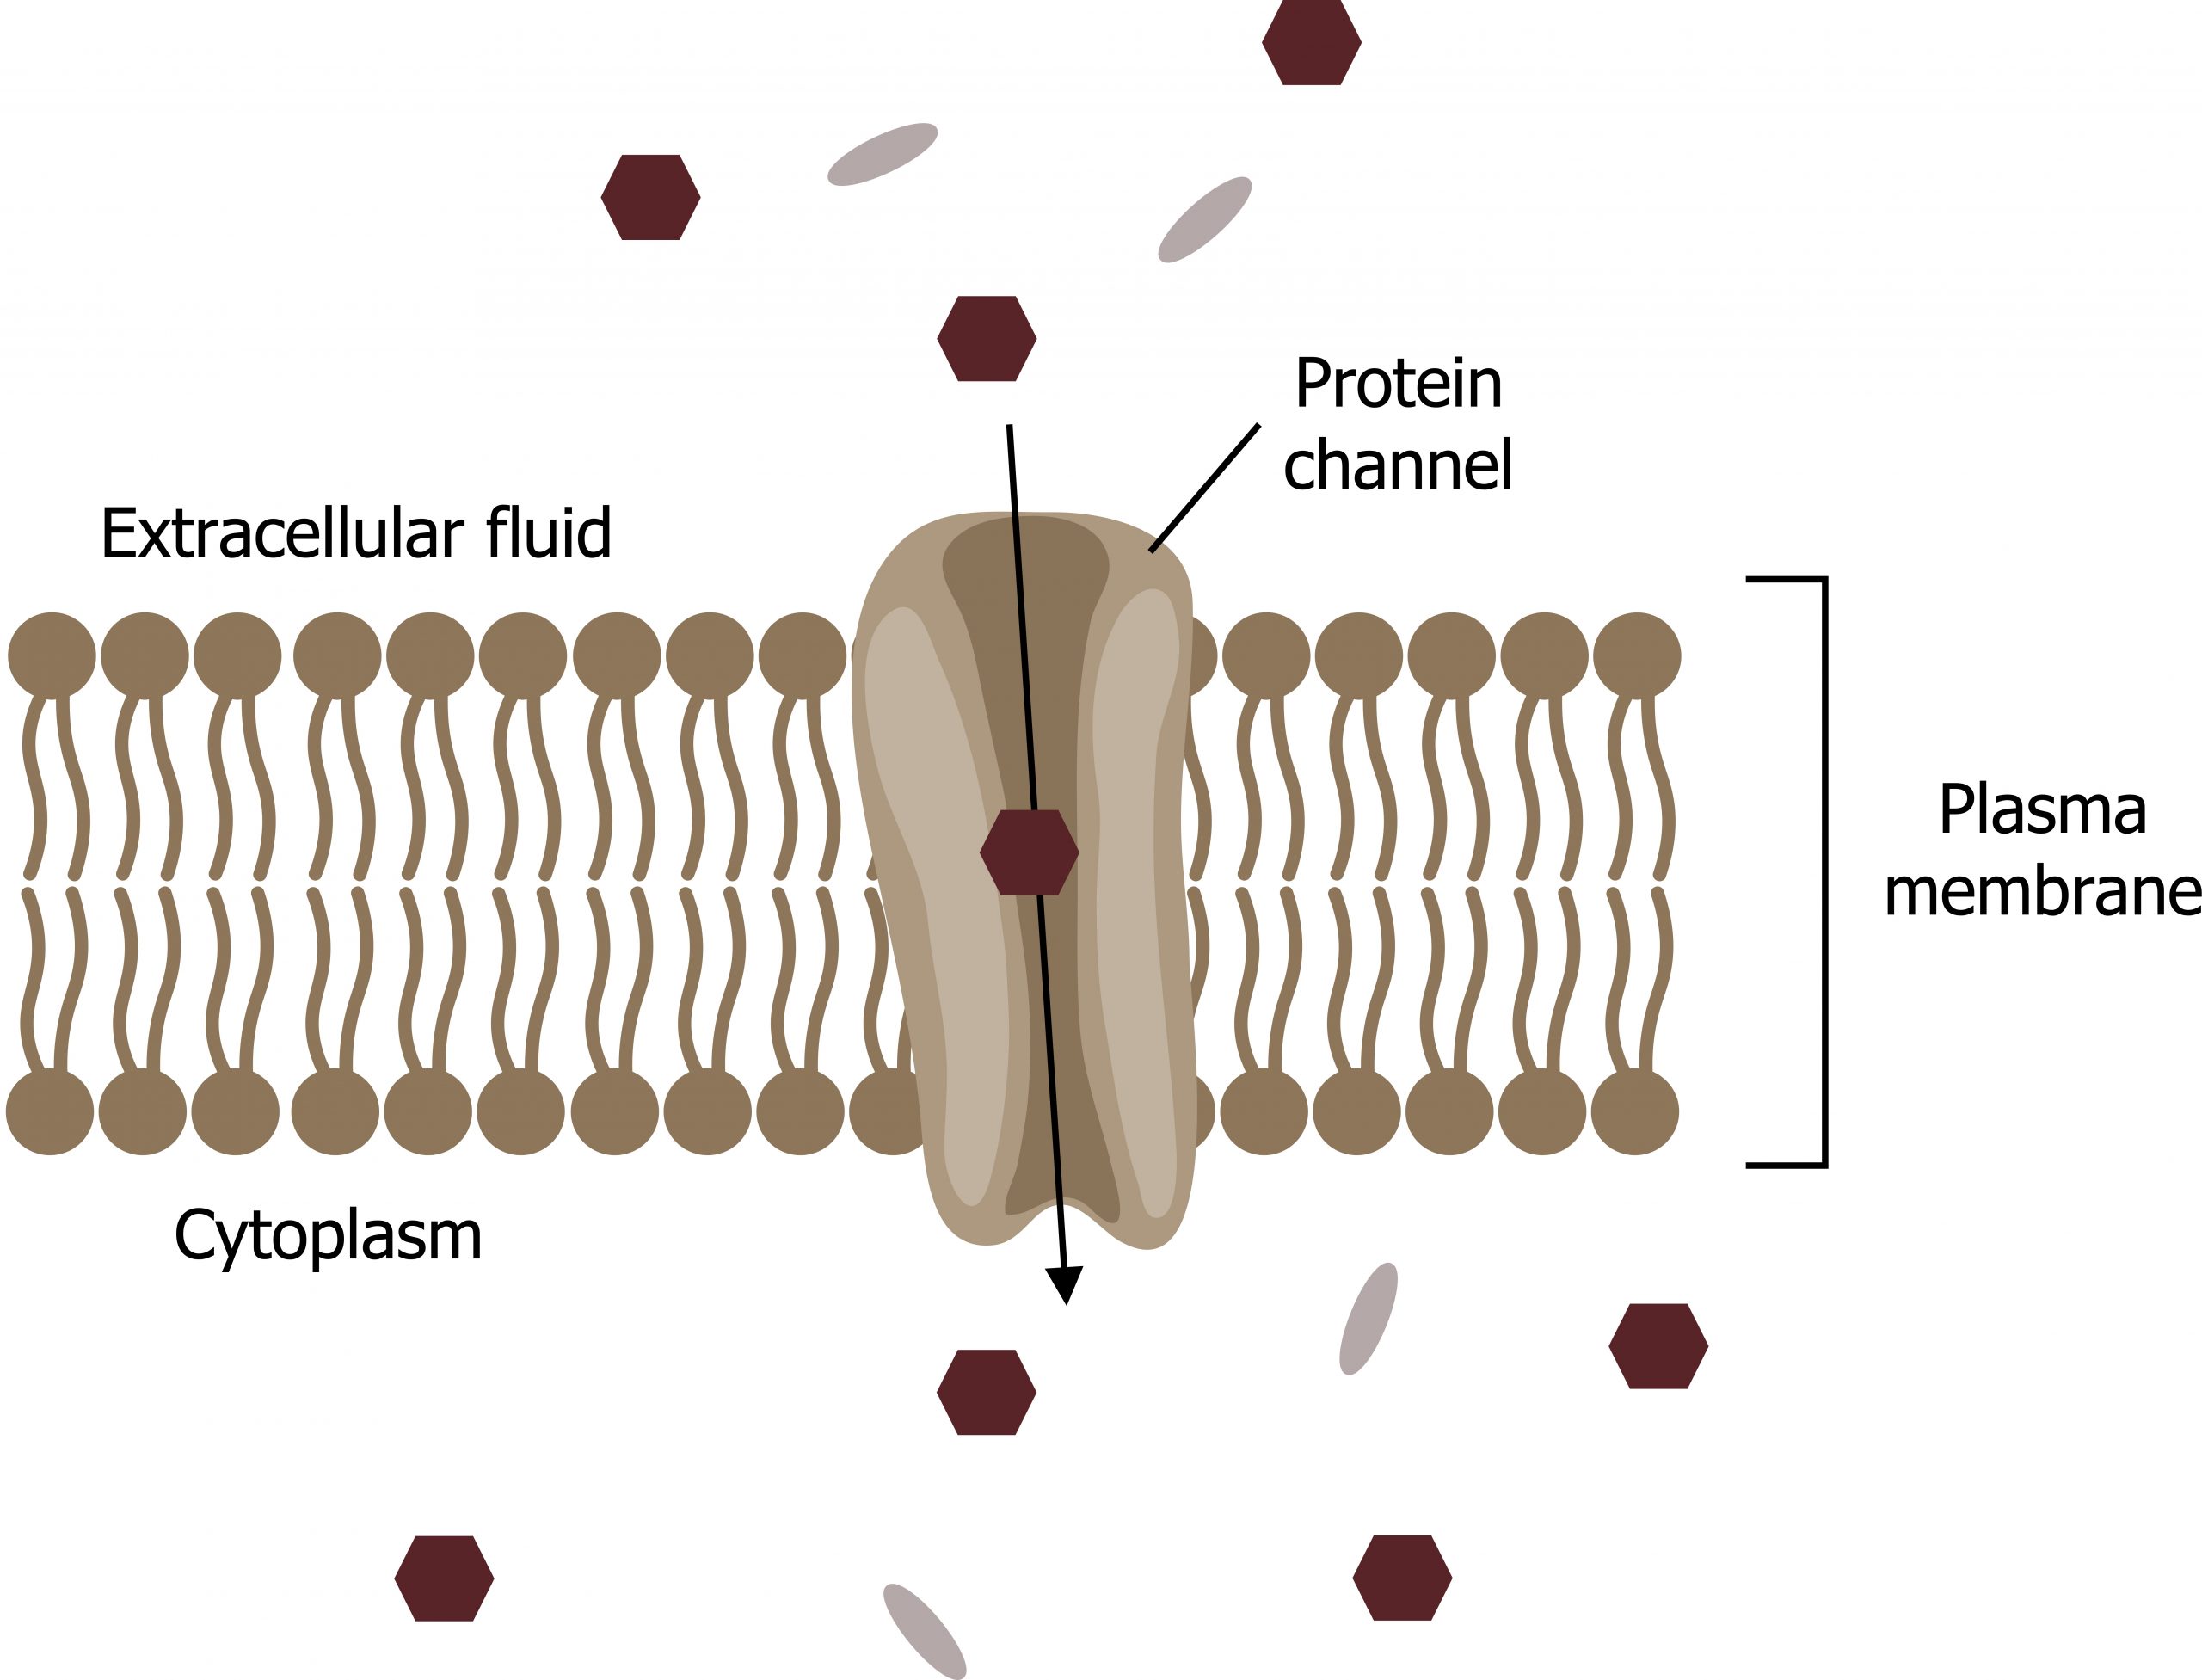 Plasma membrane separating the extracellular fluid (top) and cytoplasm (bottom). There is a transmembrane protein channel moving particles down.